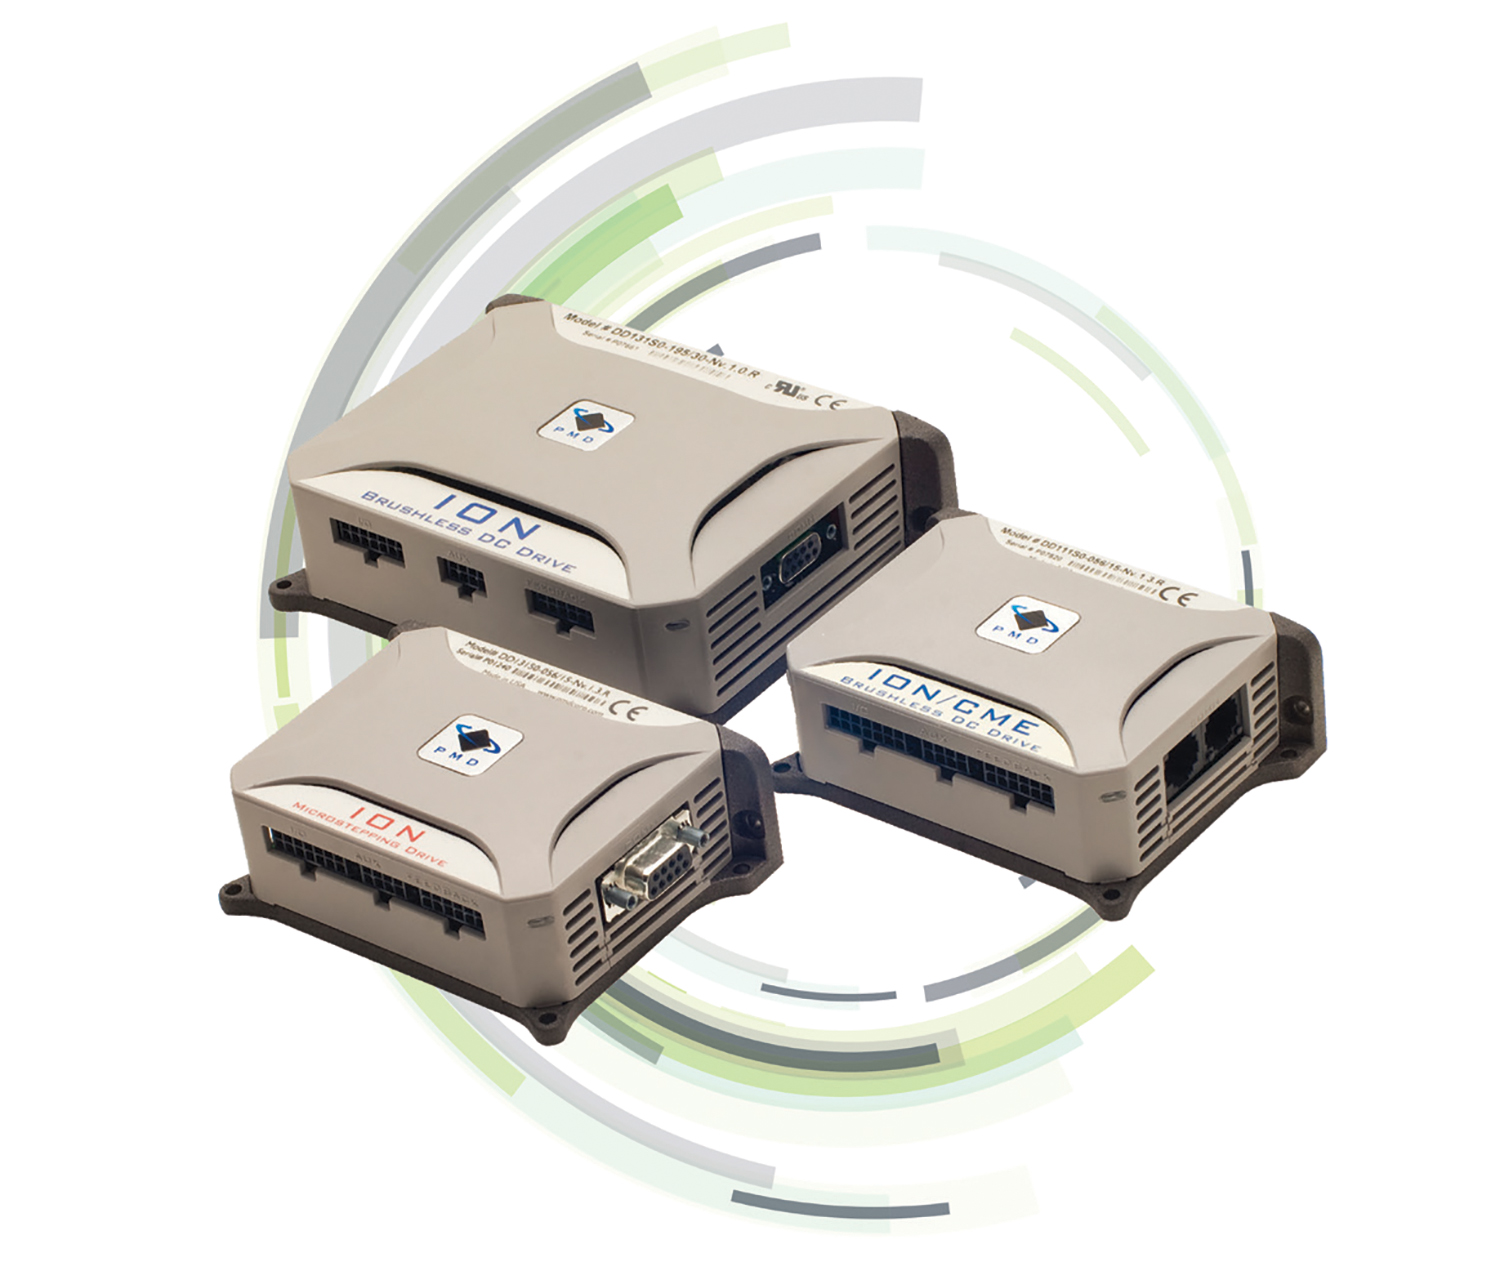 Performance Motion Devices - ION®/CME 500 Digital Drives